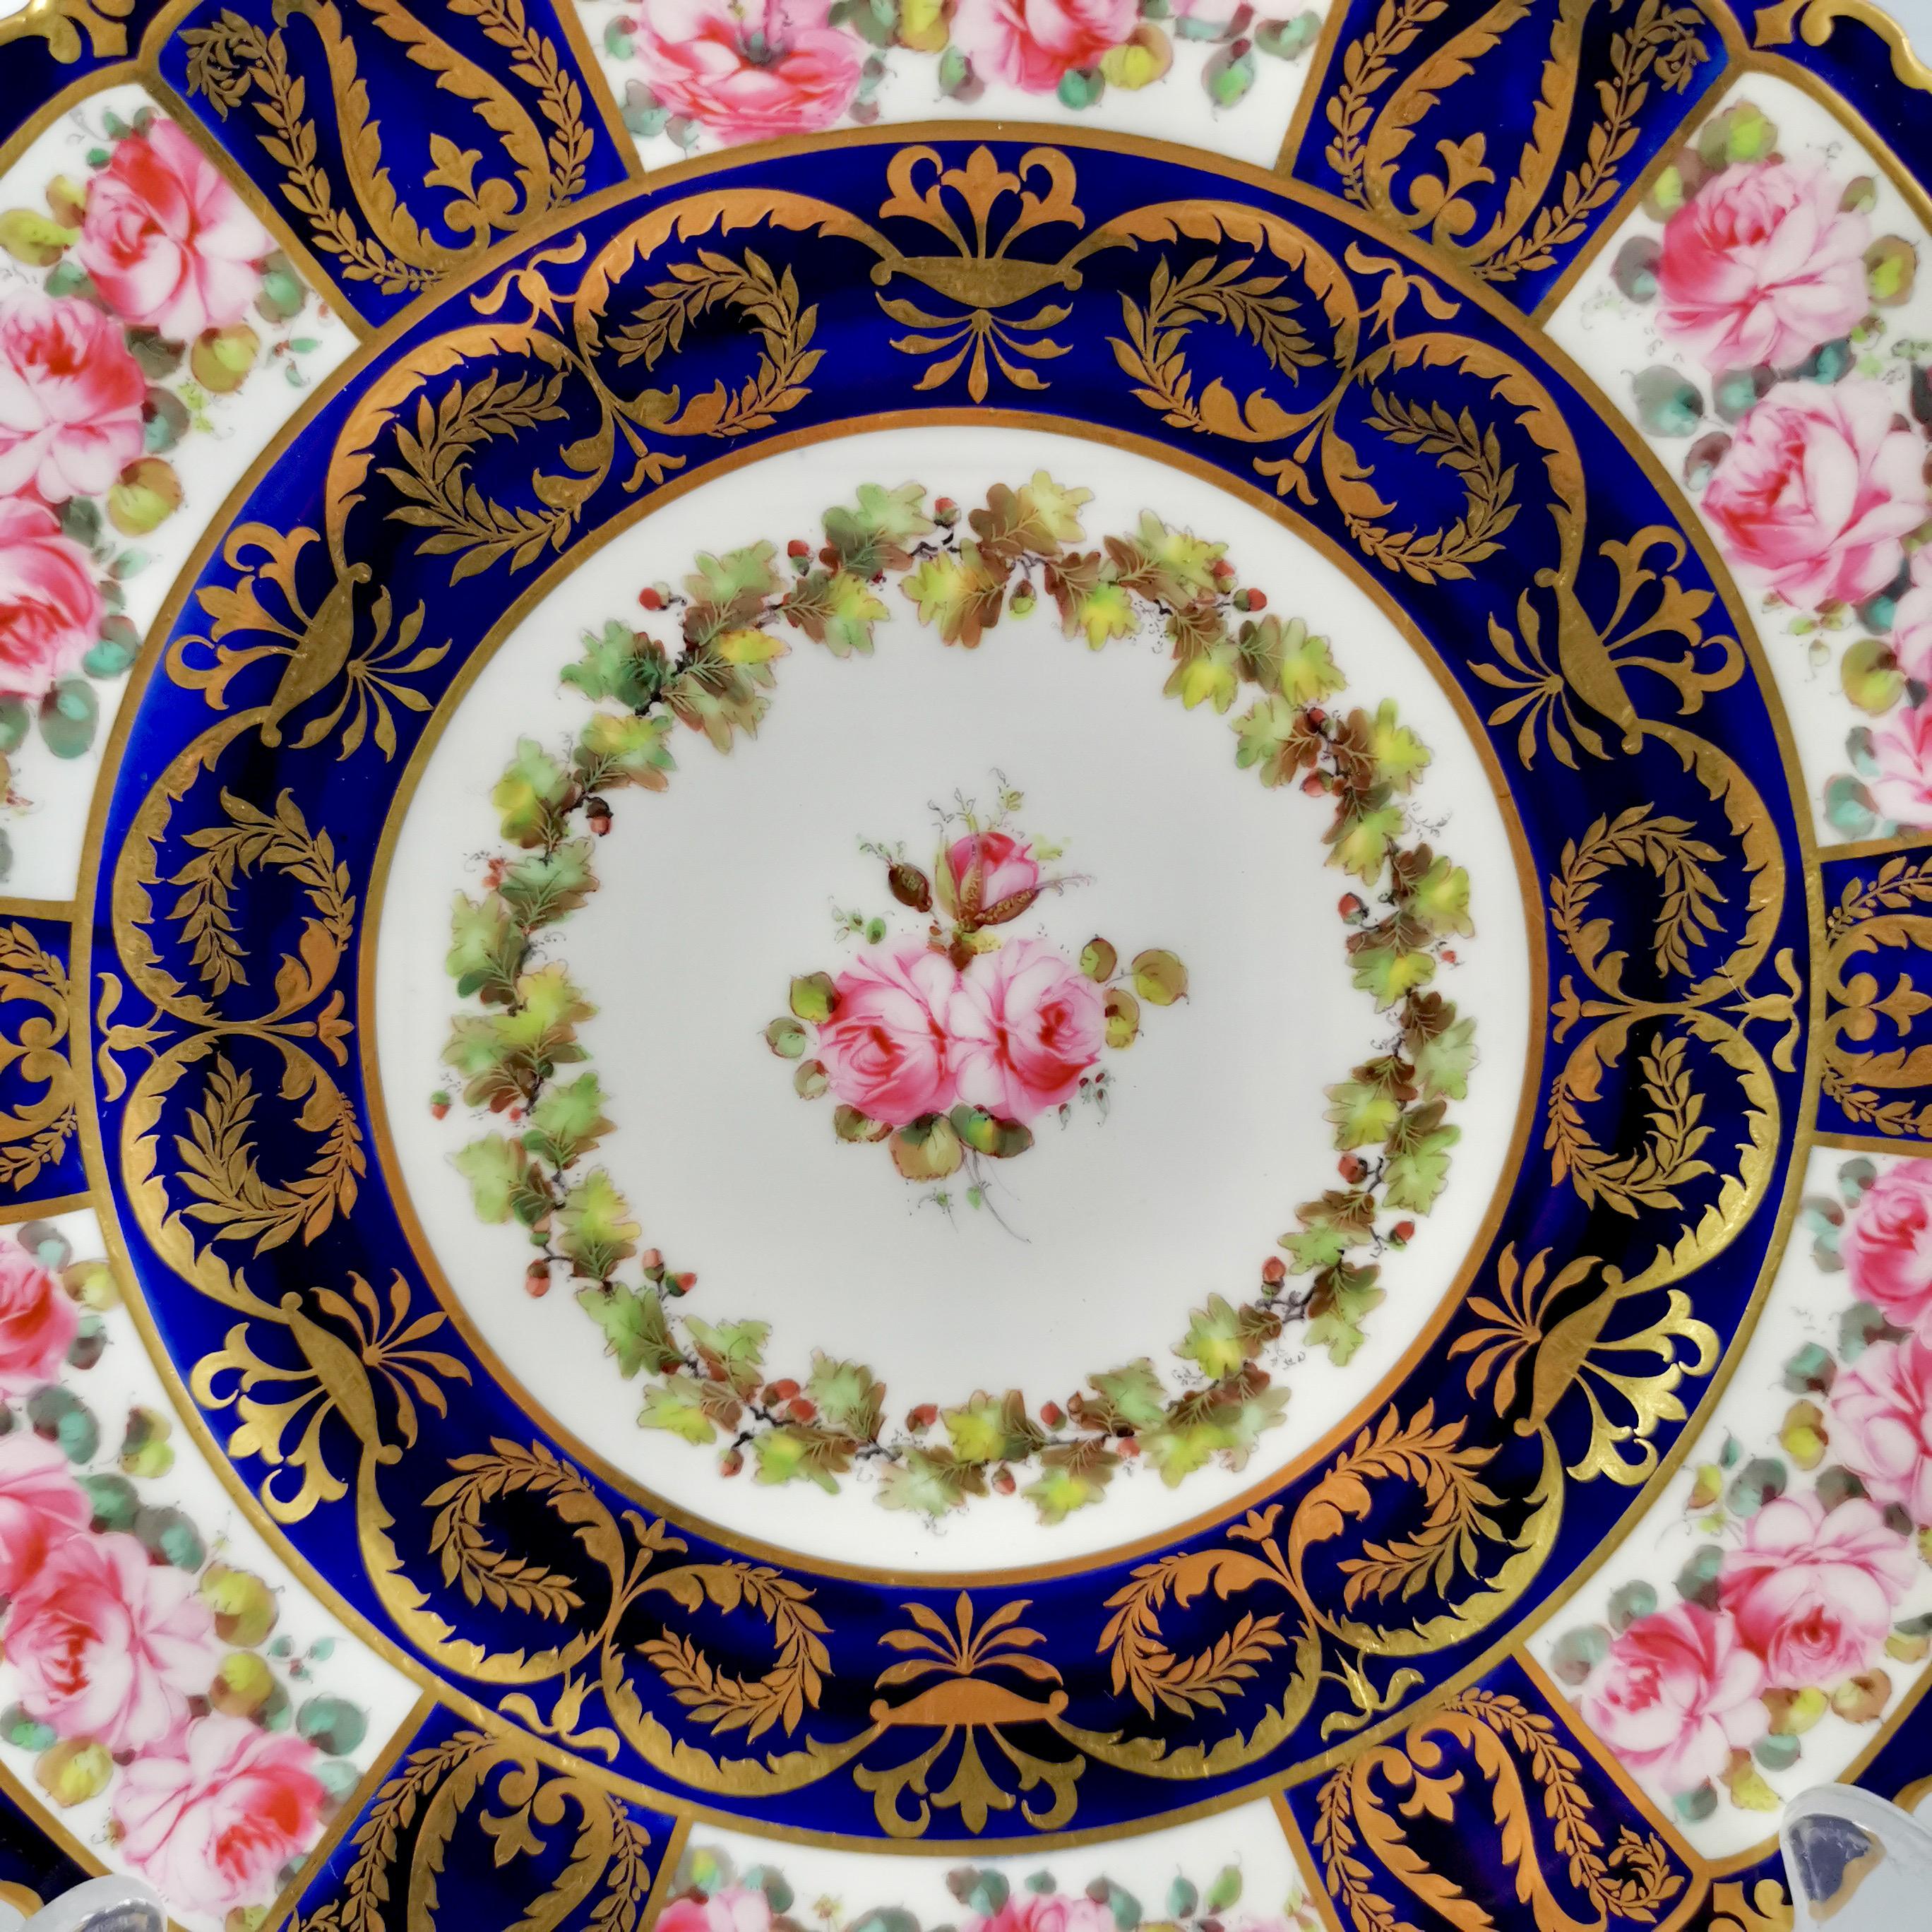 This is a stunning cabinet plate made by Royal Crown Derby in 1899. The plate has a deep cobalt or mazarine blue ground with rich gilt decorations and stunning roses painted by the celebrated porcelain artist Albert Gregory.
 
The Derby Porcelain